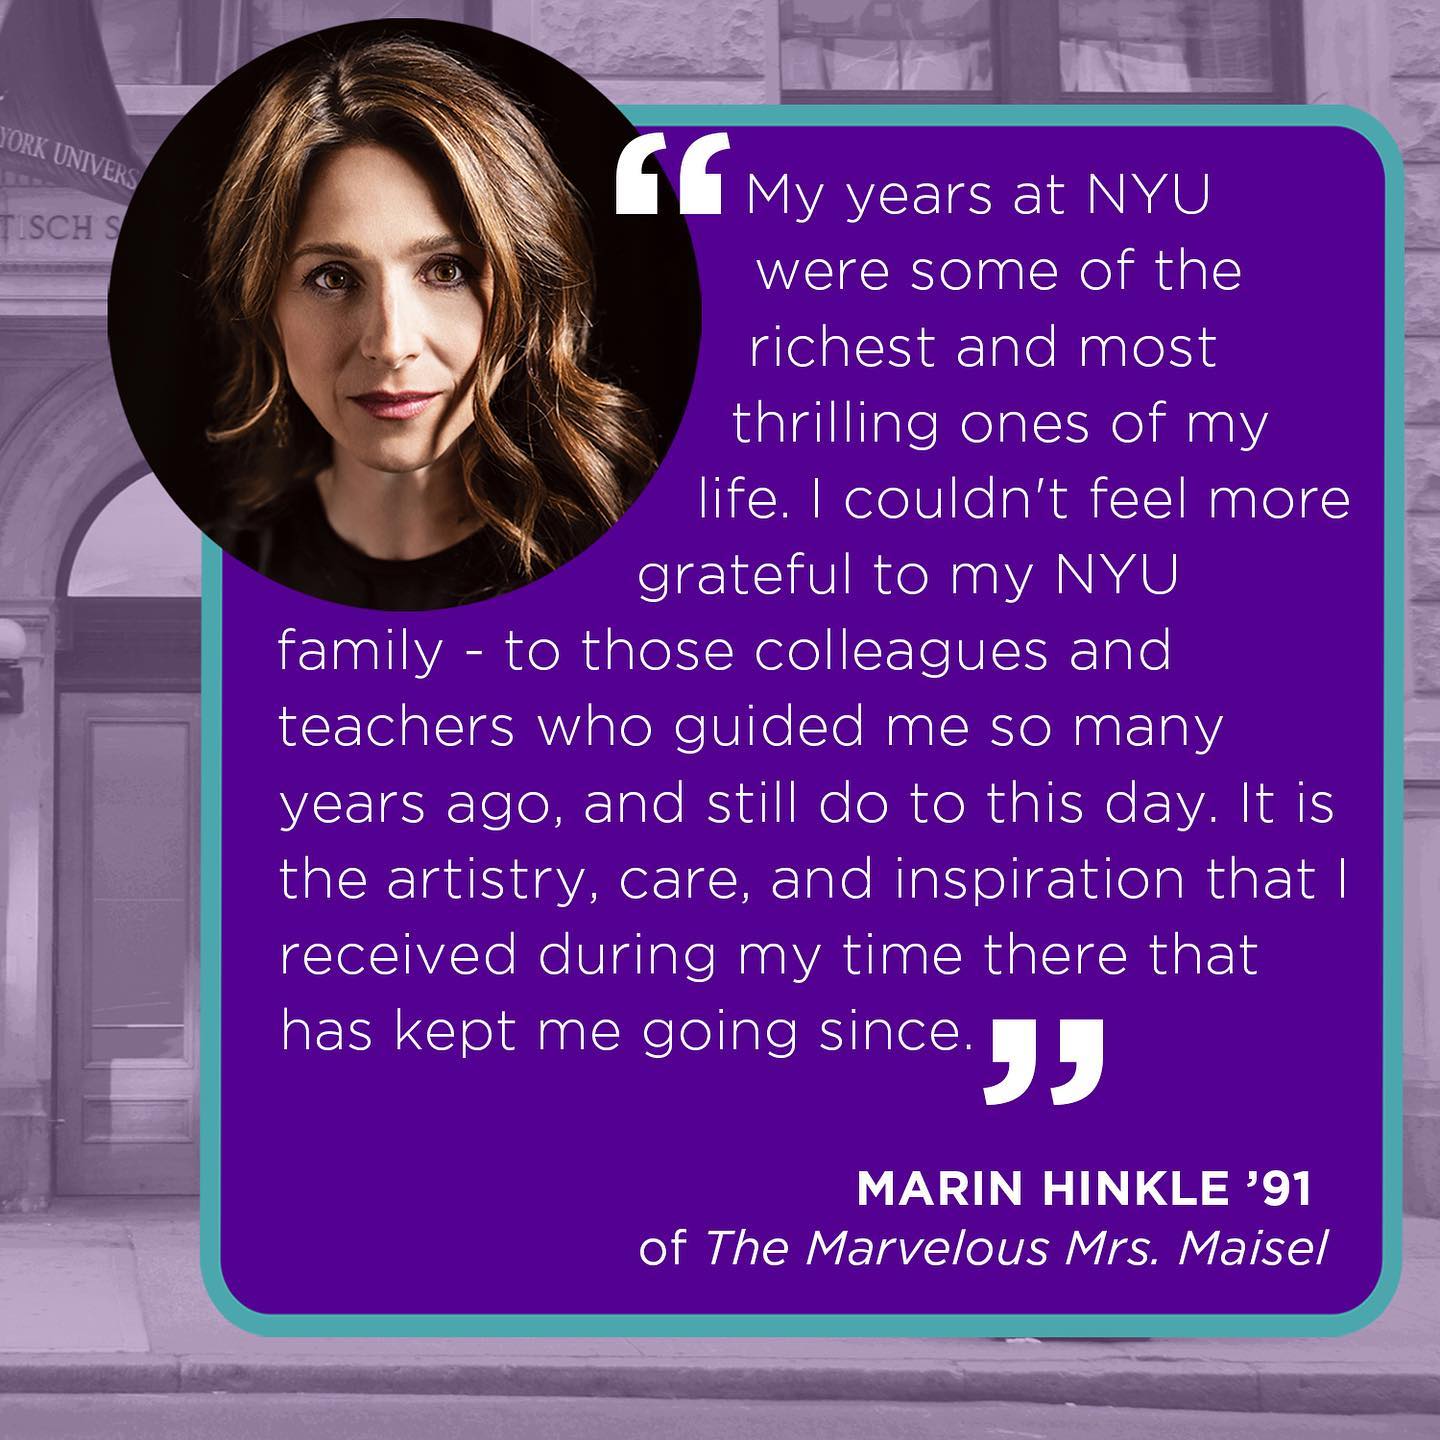 Marin Hinkle for NYU One Day